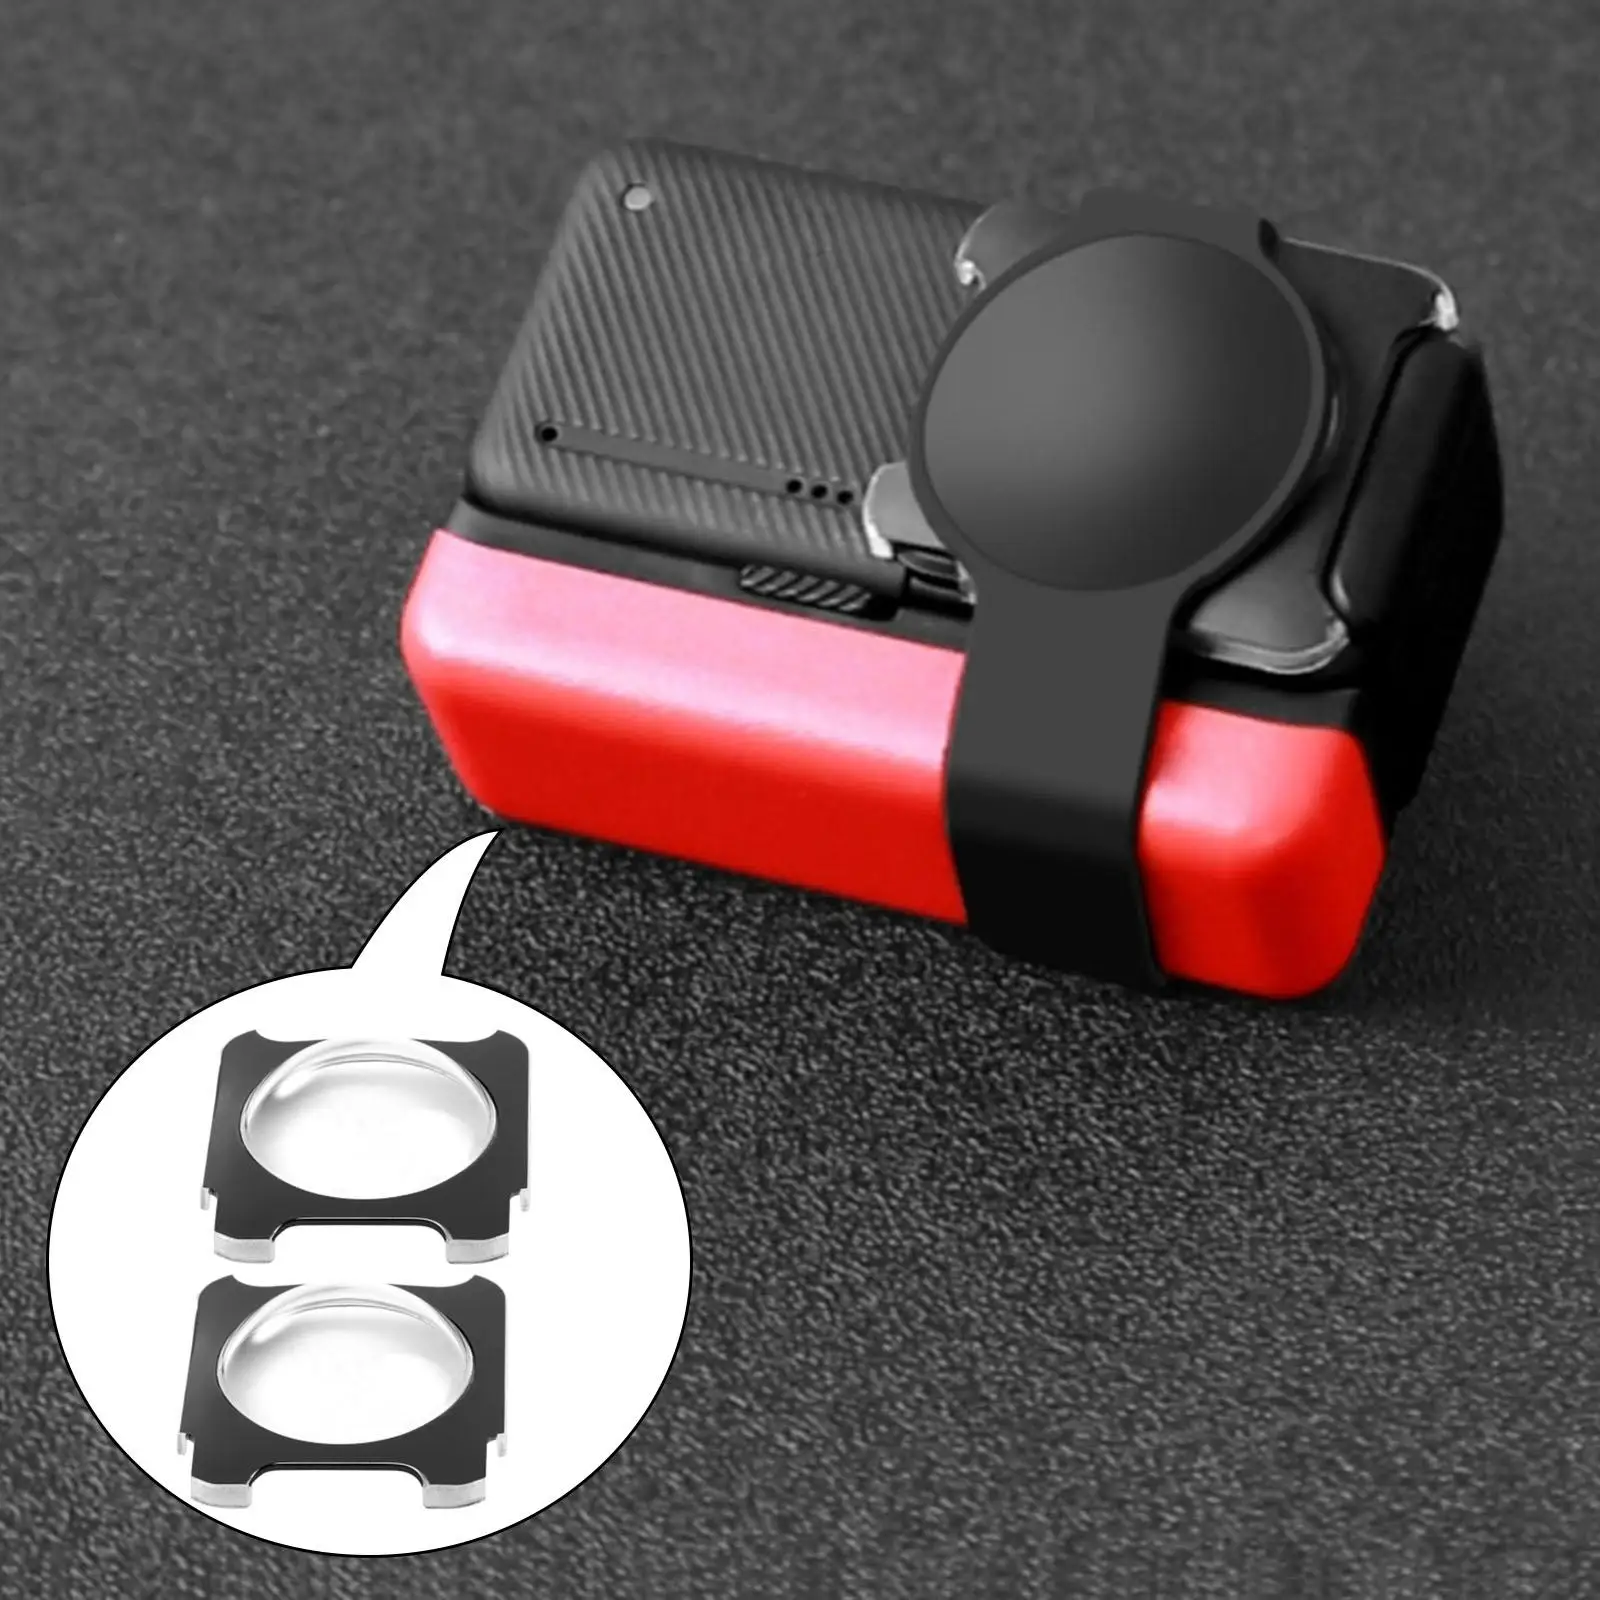 Sticky Lens Guards PC Silicone Oilproof Scratch Resistant Dustproof Protective Cover for Insta360 One R RS Sphere Action Camera